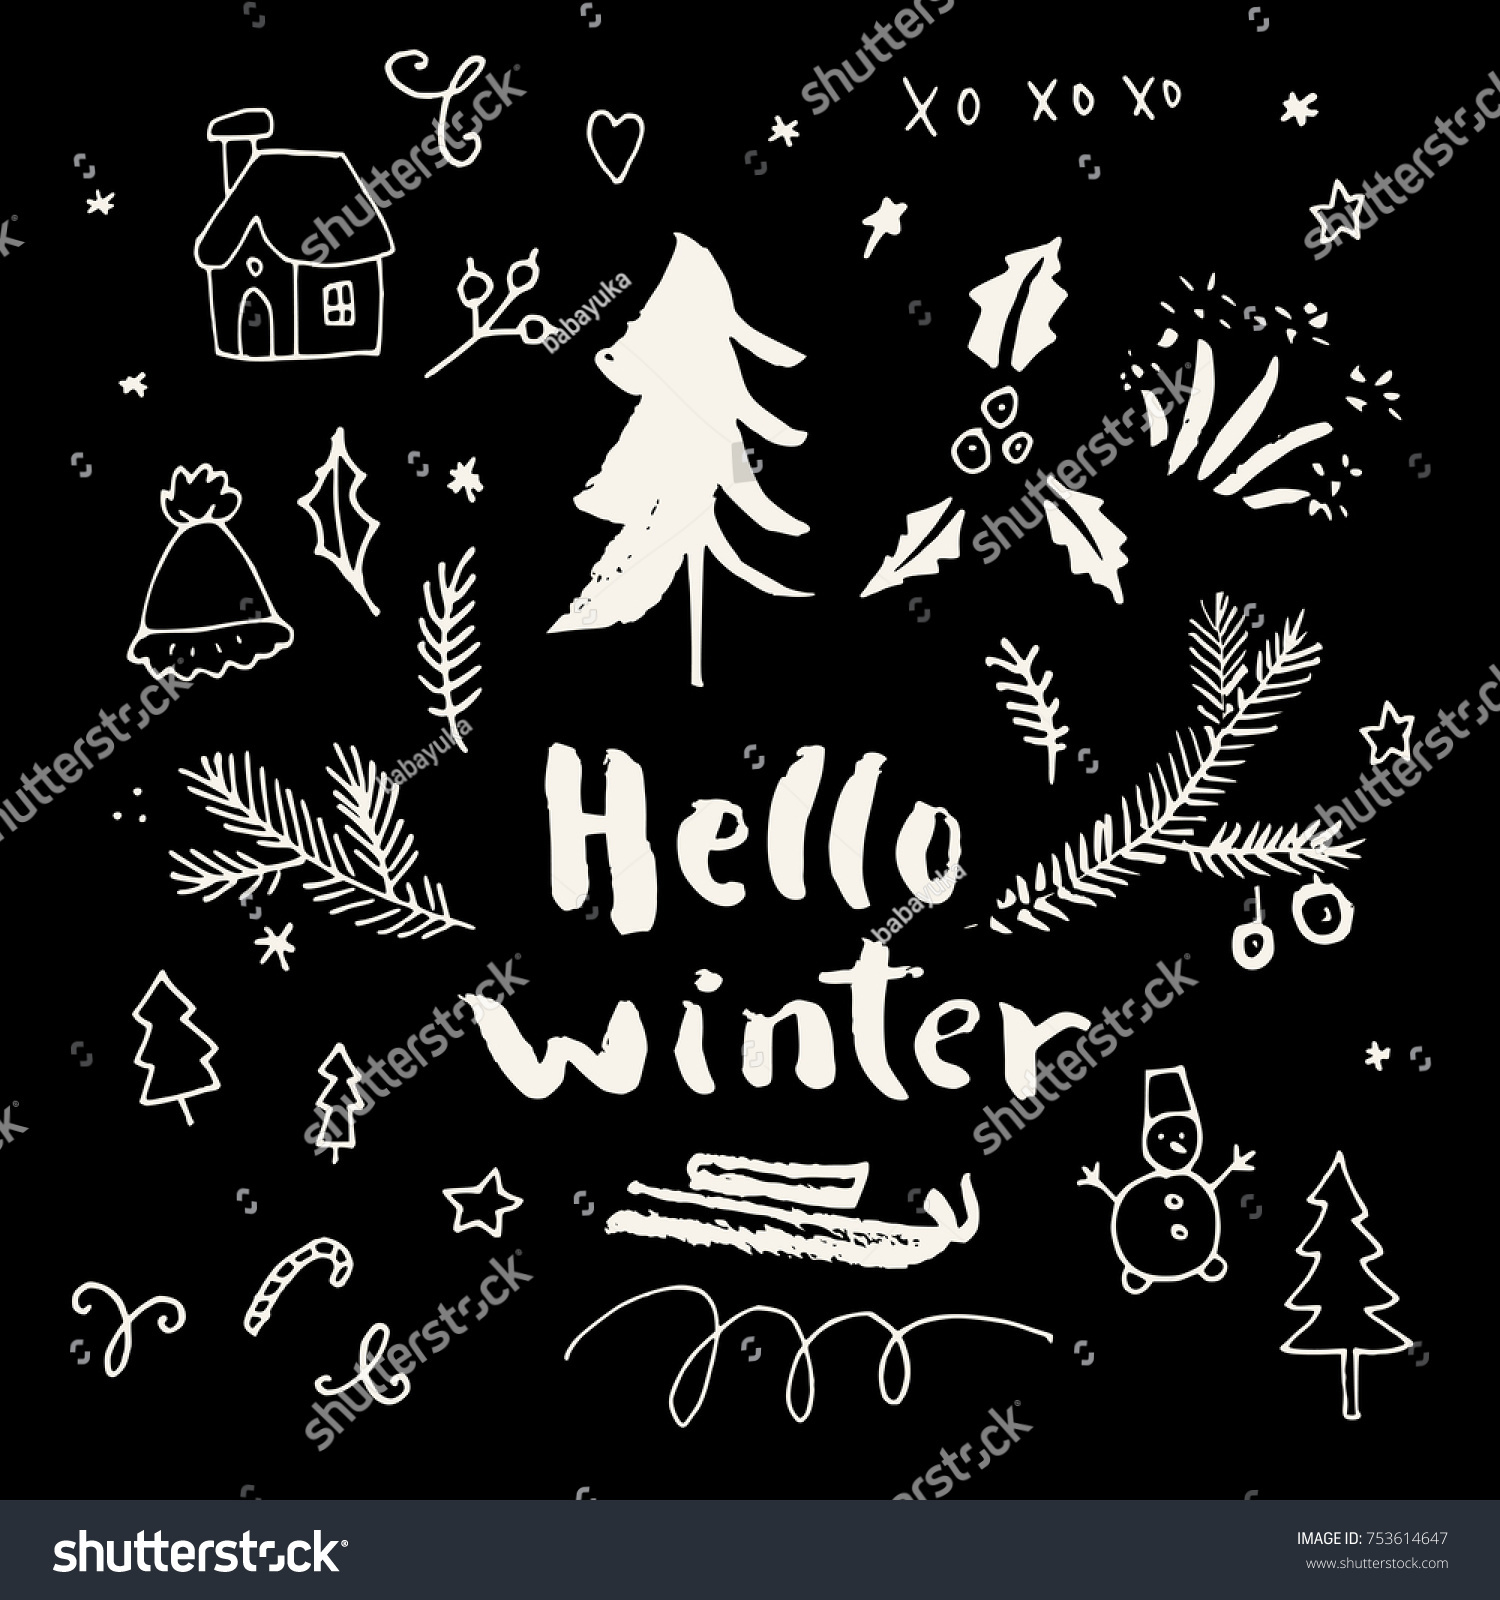 Hello Winter Merry Christmas and Holiday Season calligraphic hand drawn greeting card in black and